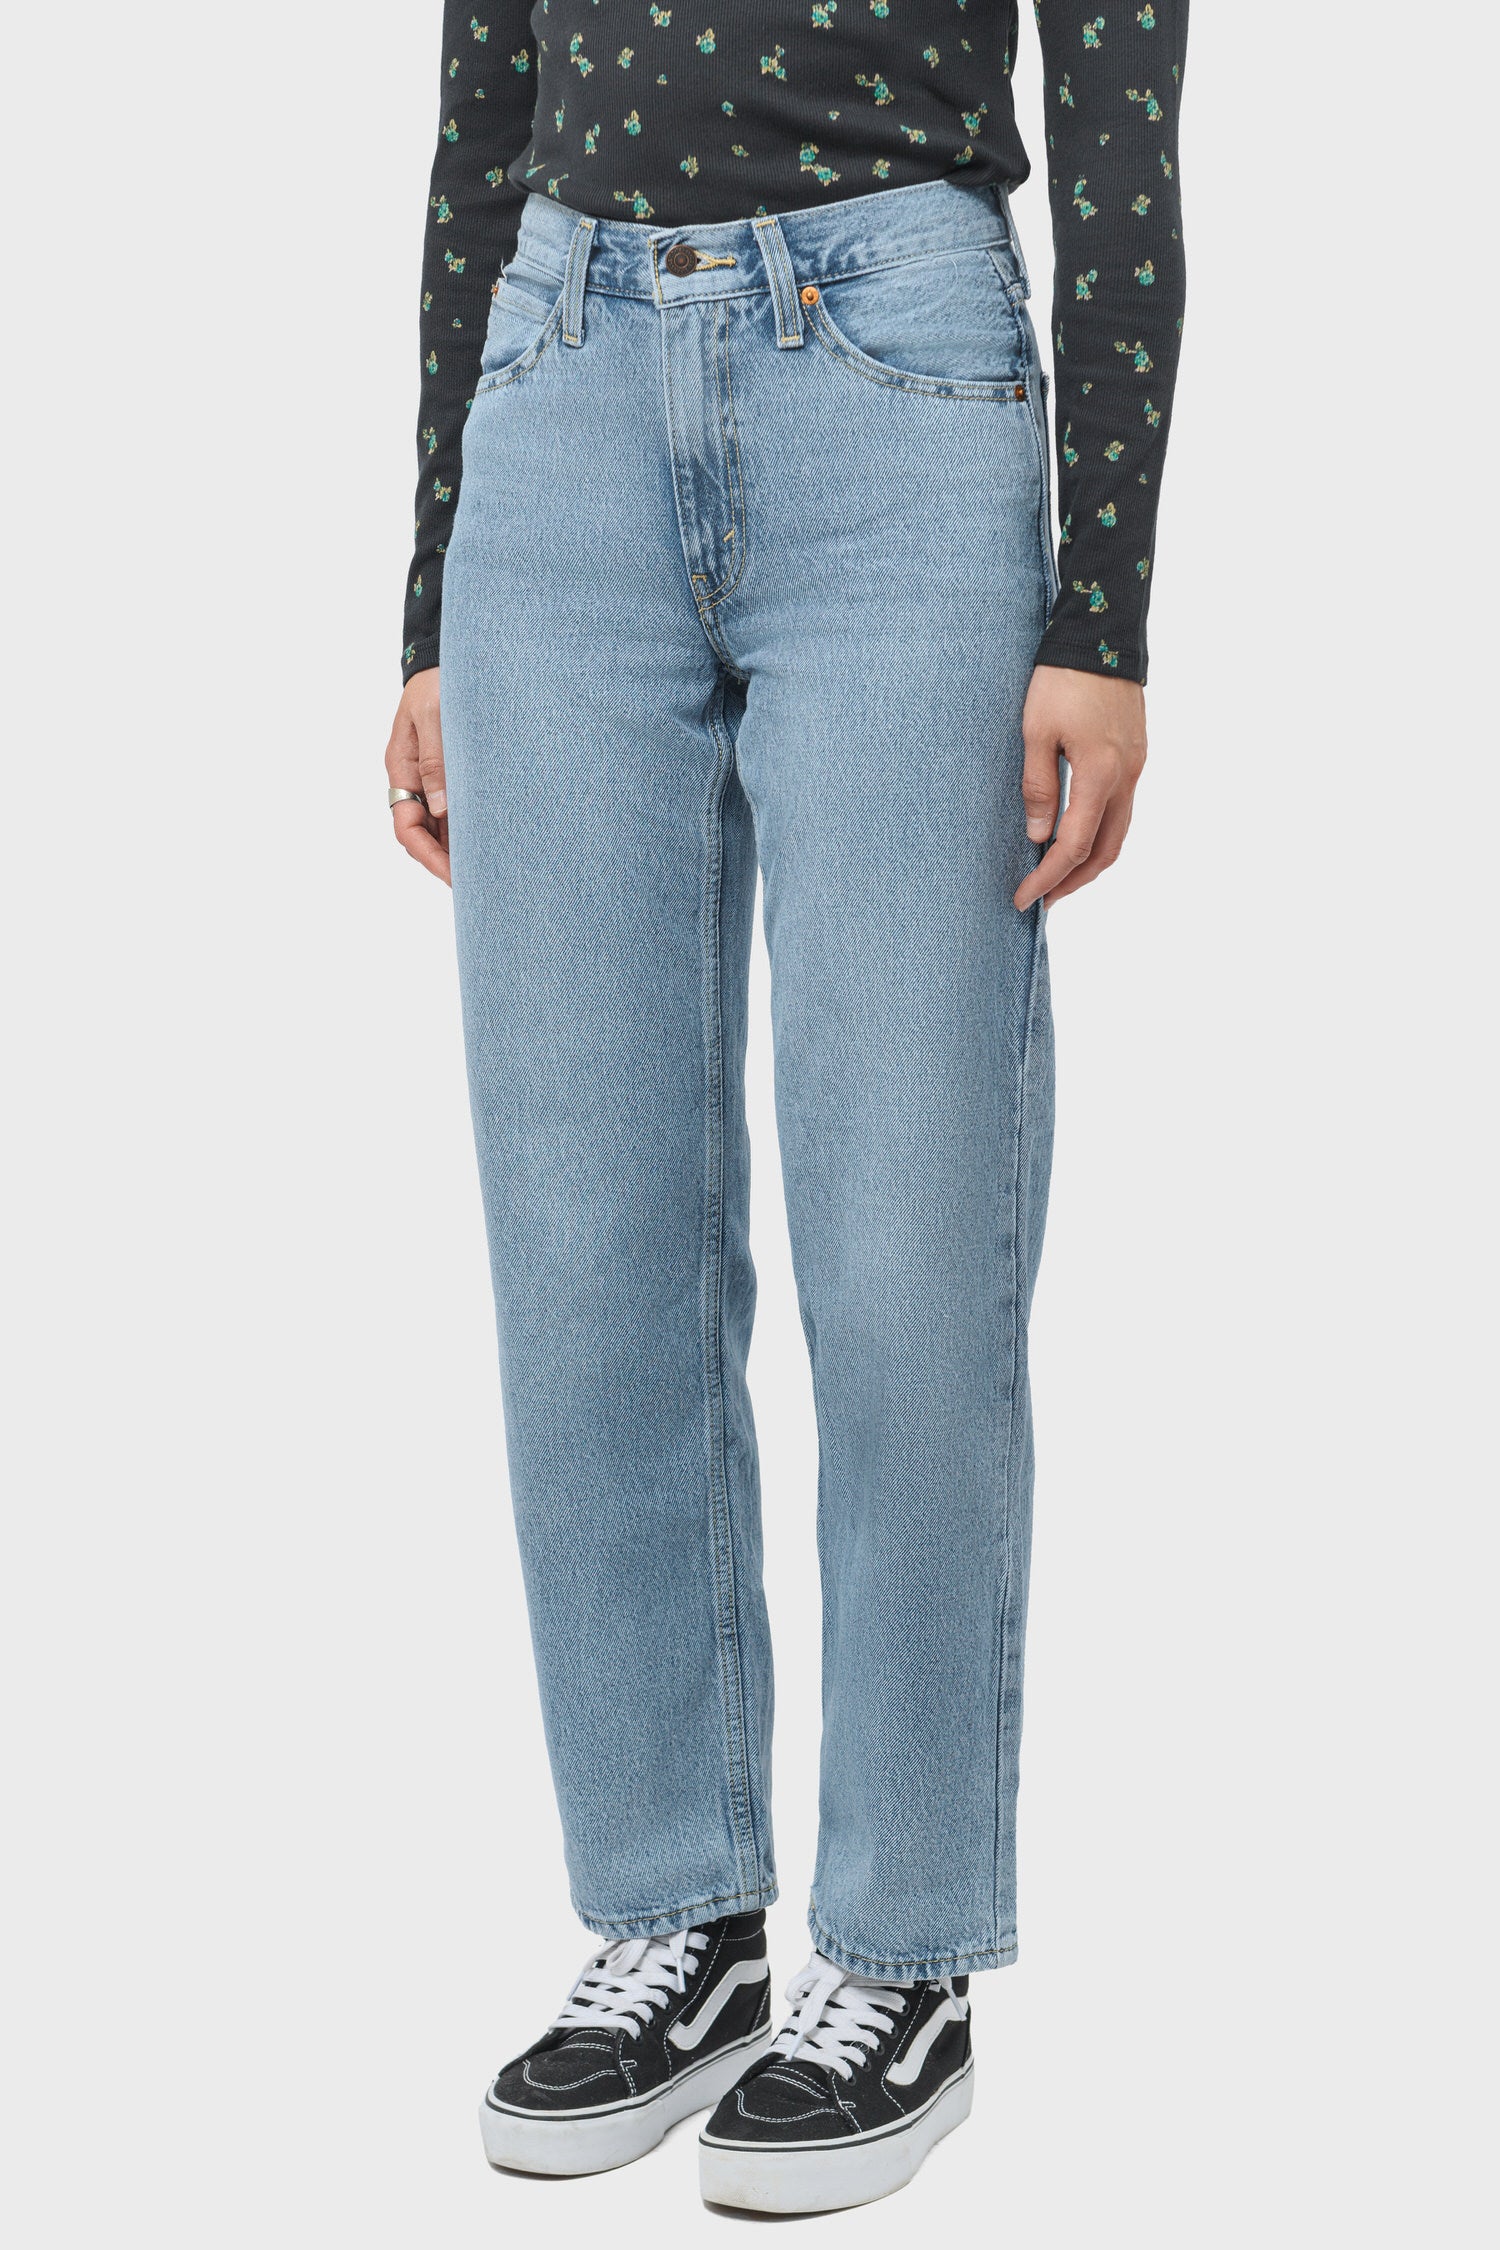 Women's Levi's Dad Jean in Far and Wide